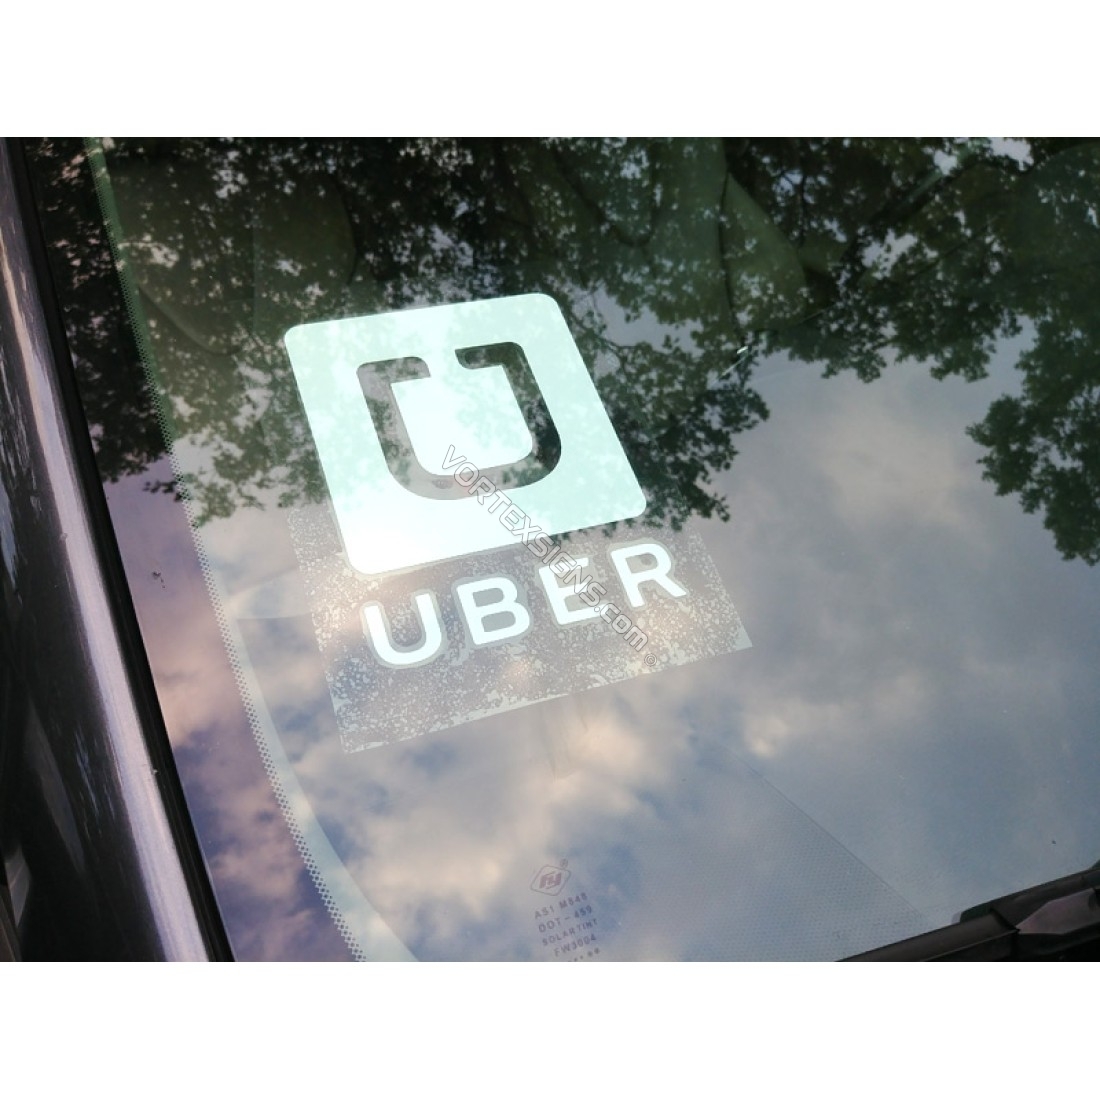 SALE! Removable UBER decal / sign static Cling & stickers